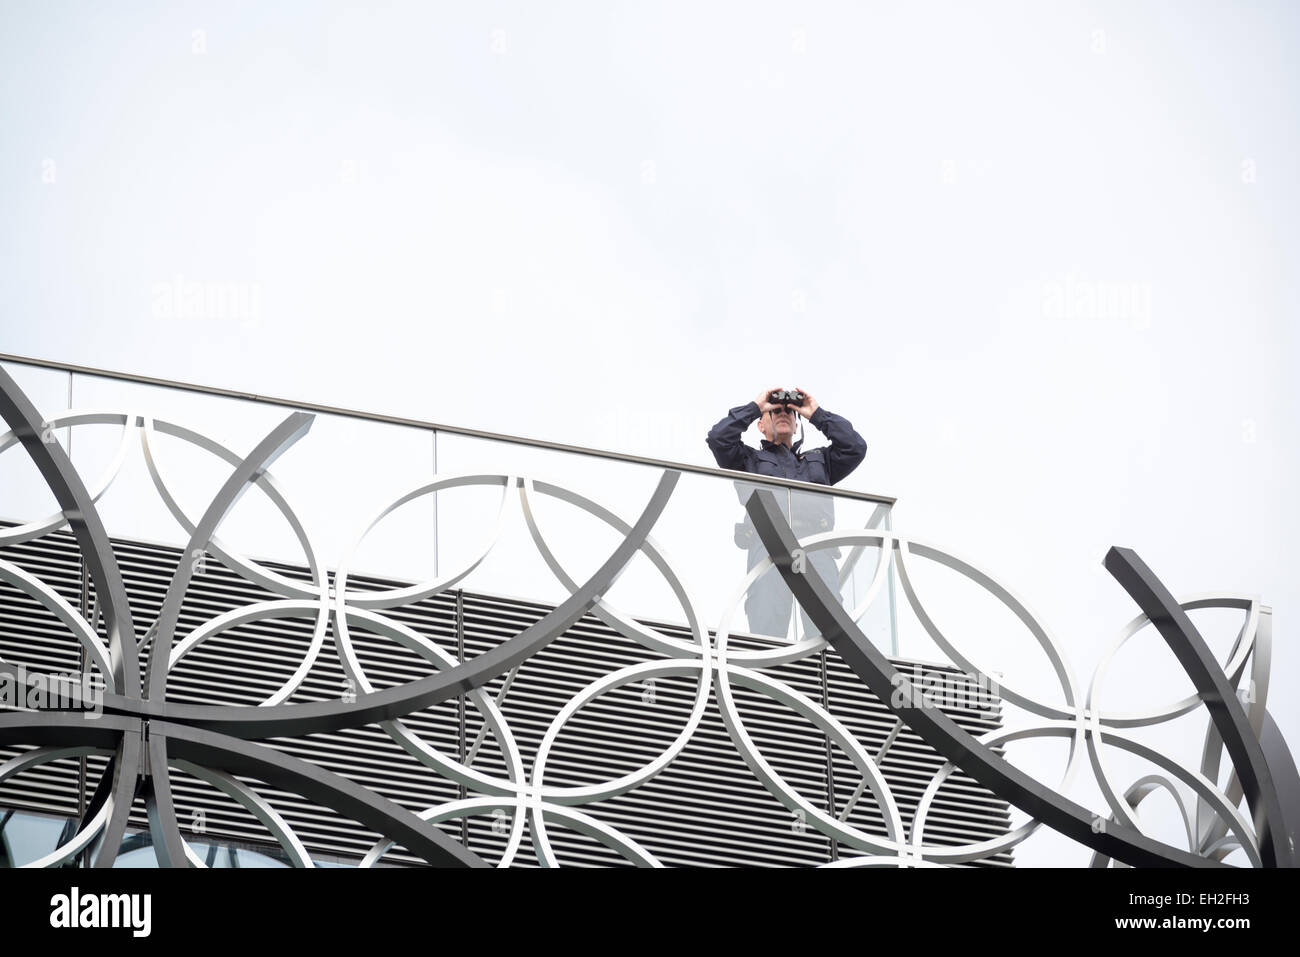 Police surveillance. Policeman looking through binoculars from balcony on Library of Birmingham at Conservative Party conference Stock Photo